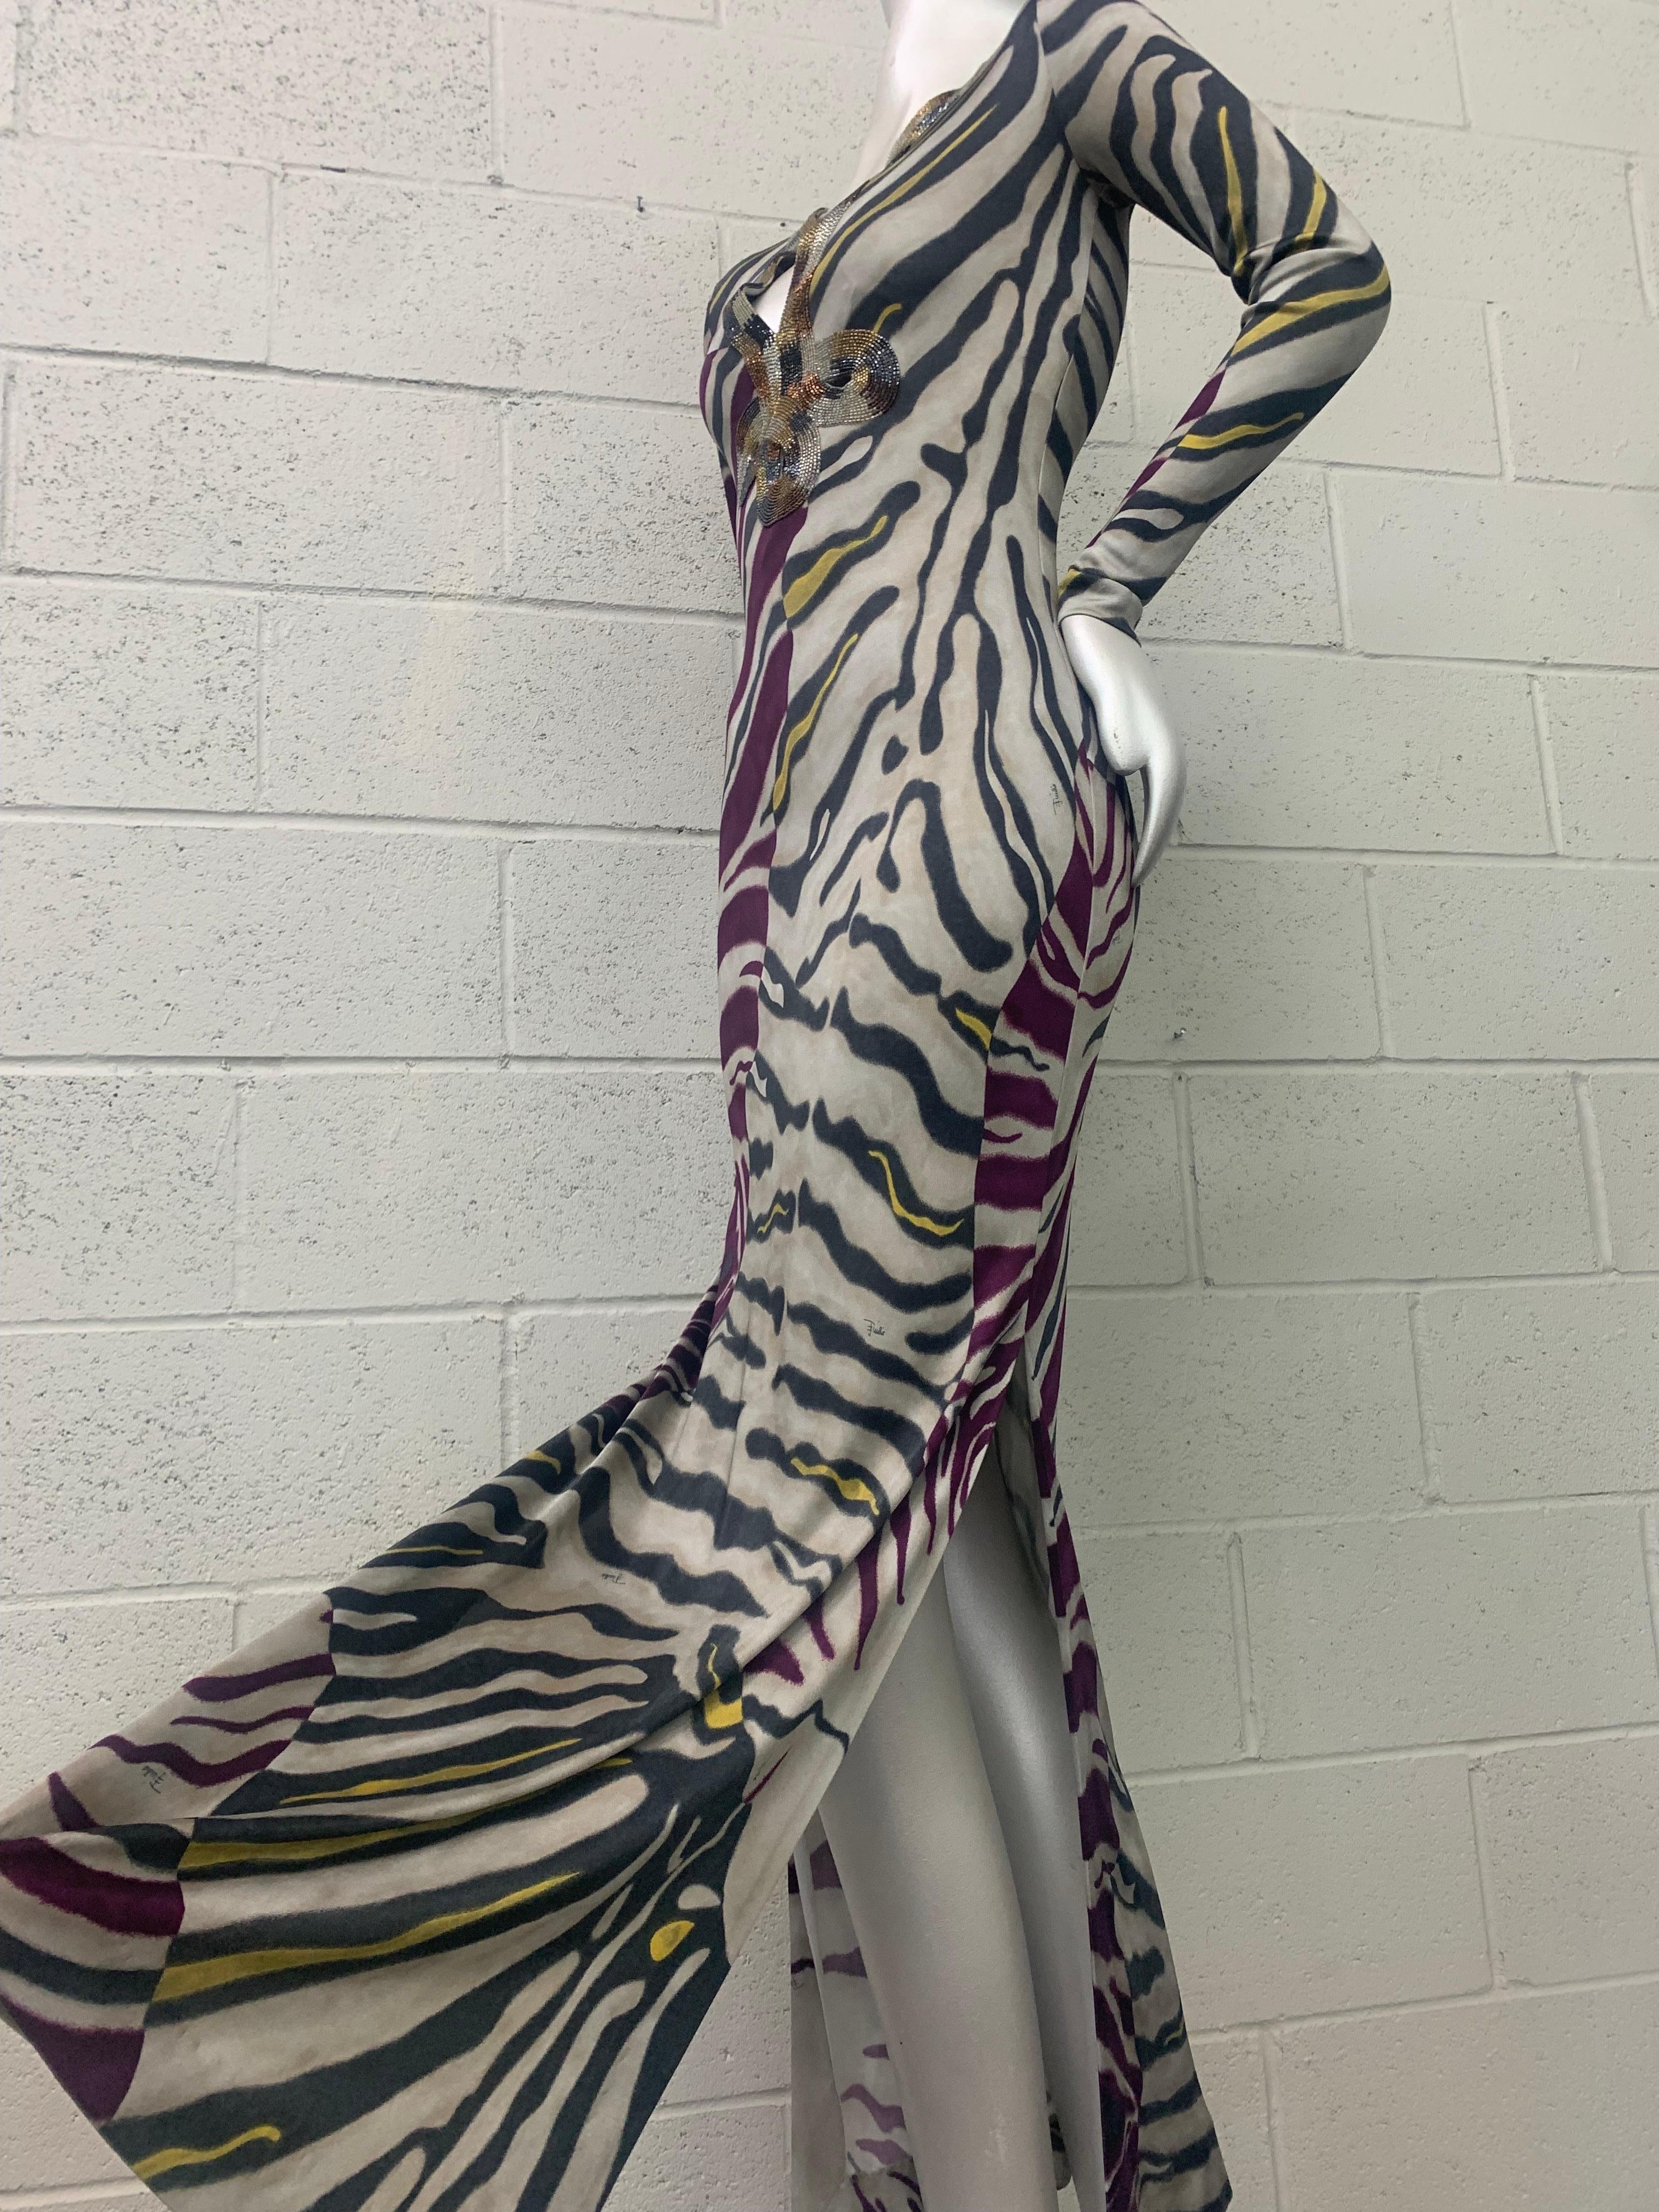 Emilio Pucci Stylized Zebra-Print Body-Conscious Beaded Maxi Dress in Rayon Knit For Sale 7